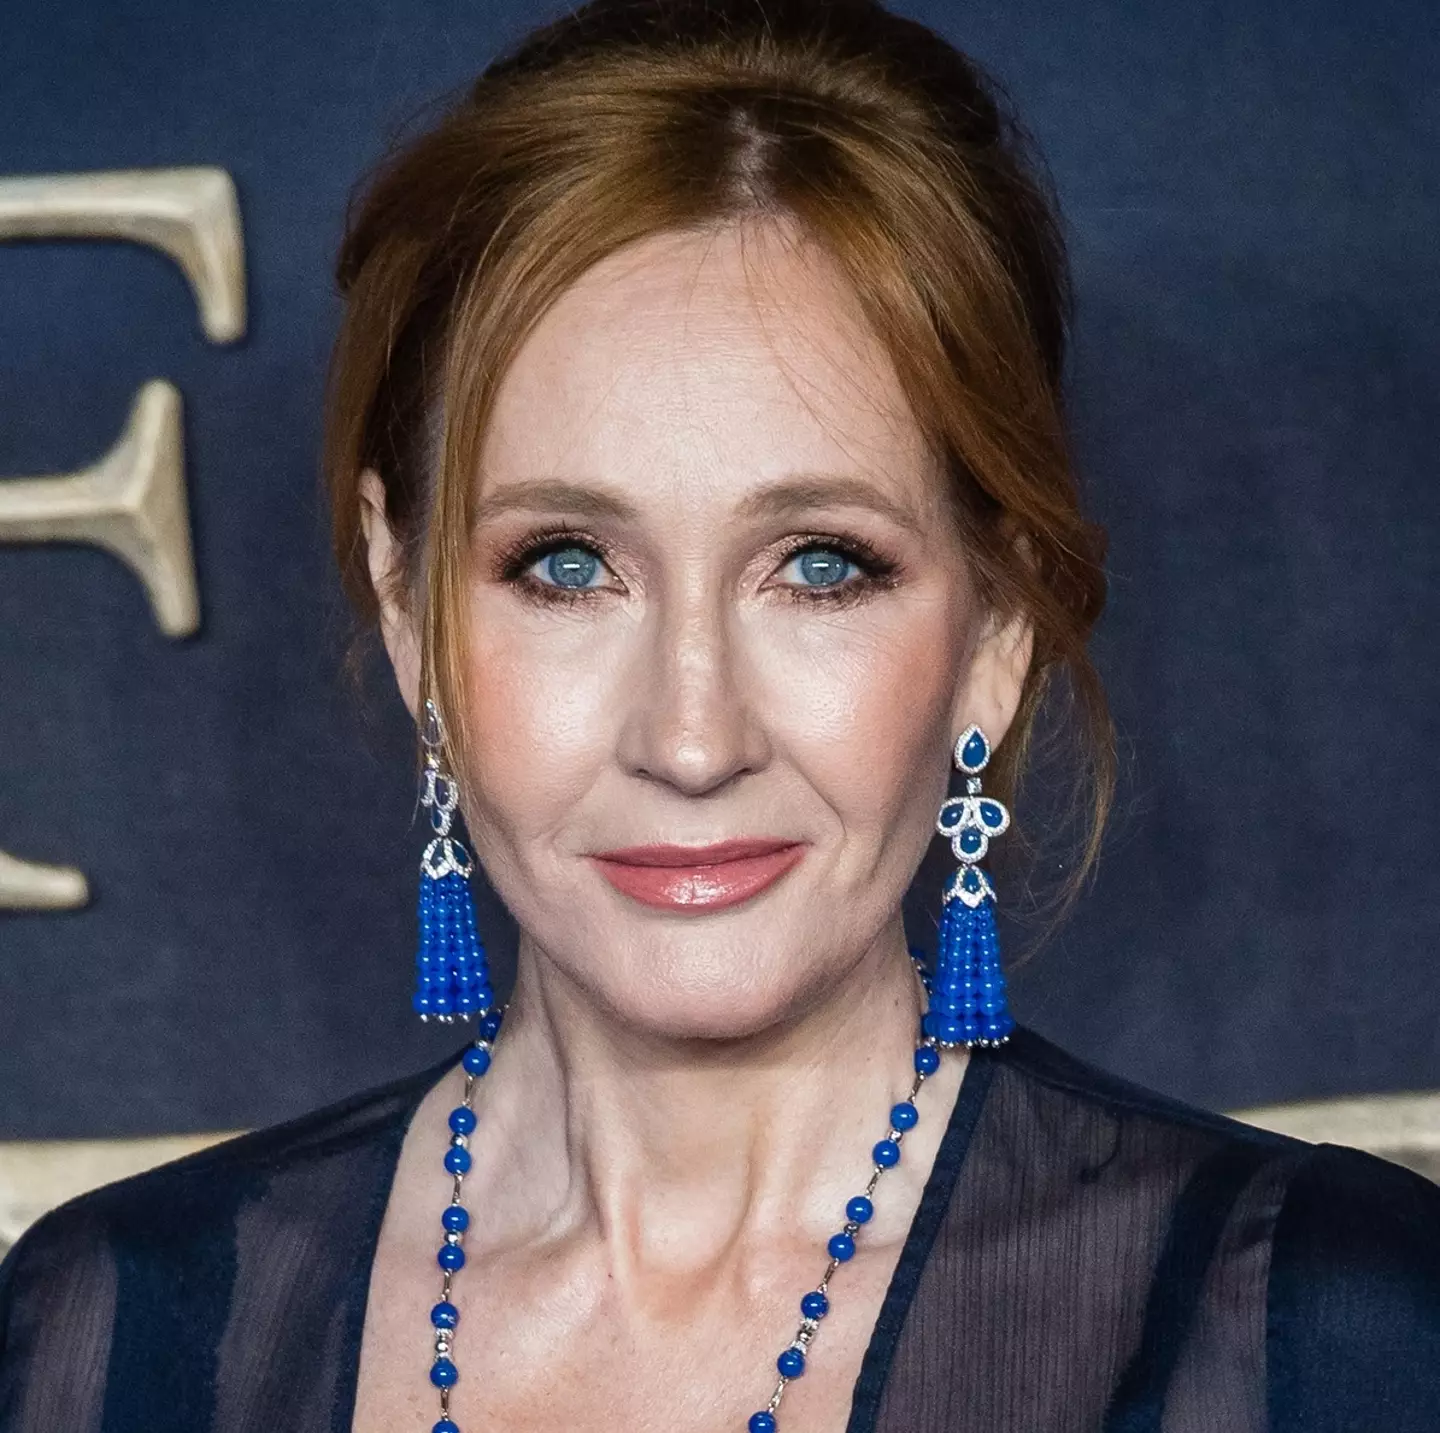 JK Rowling talks about trans rights quite a lot on the internet. (Samir Hussein/WireImage)